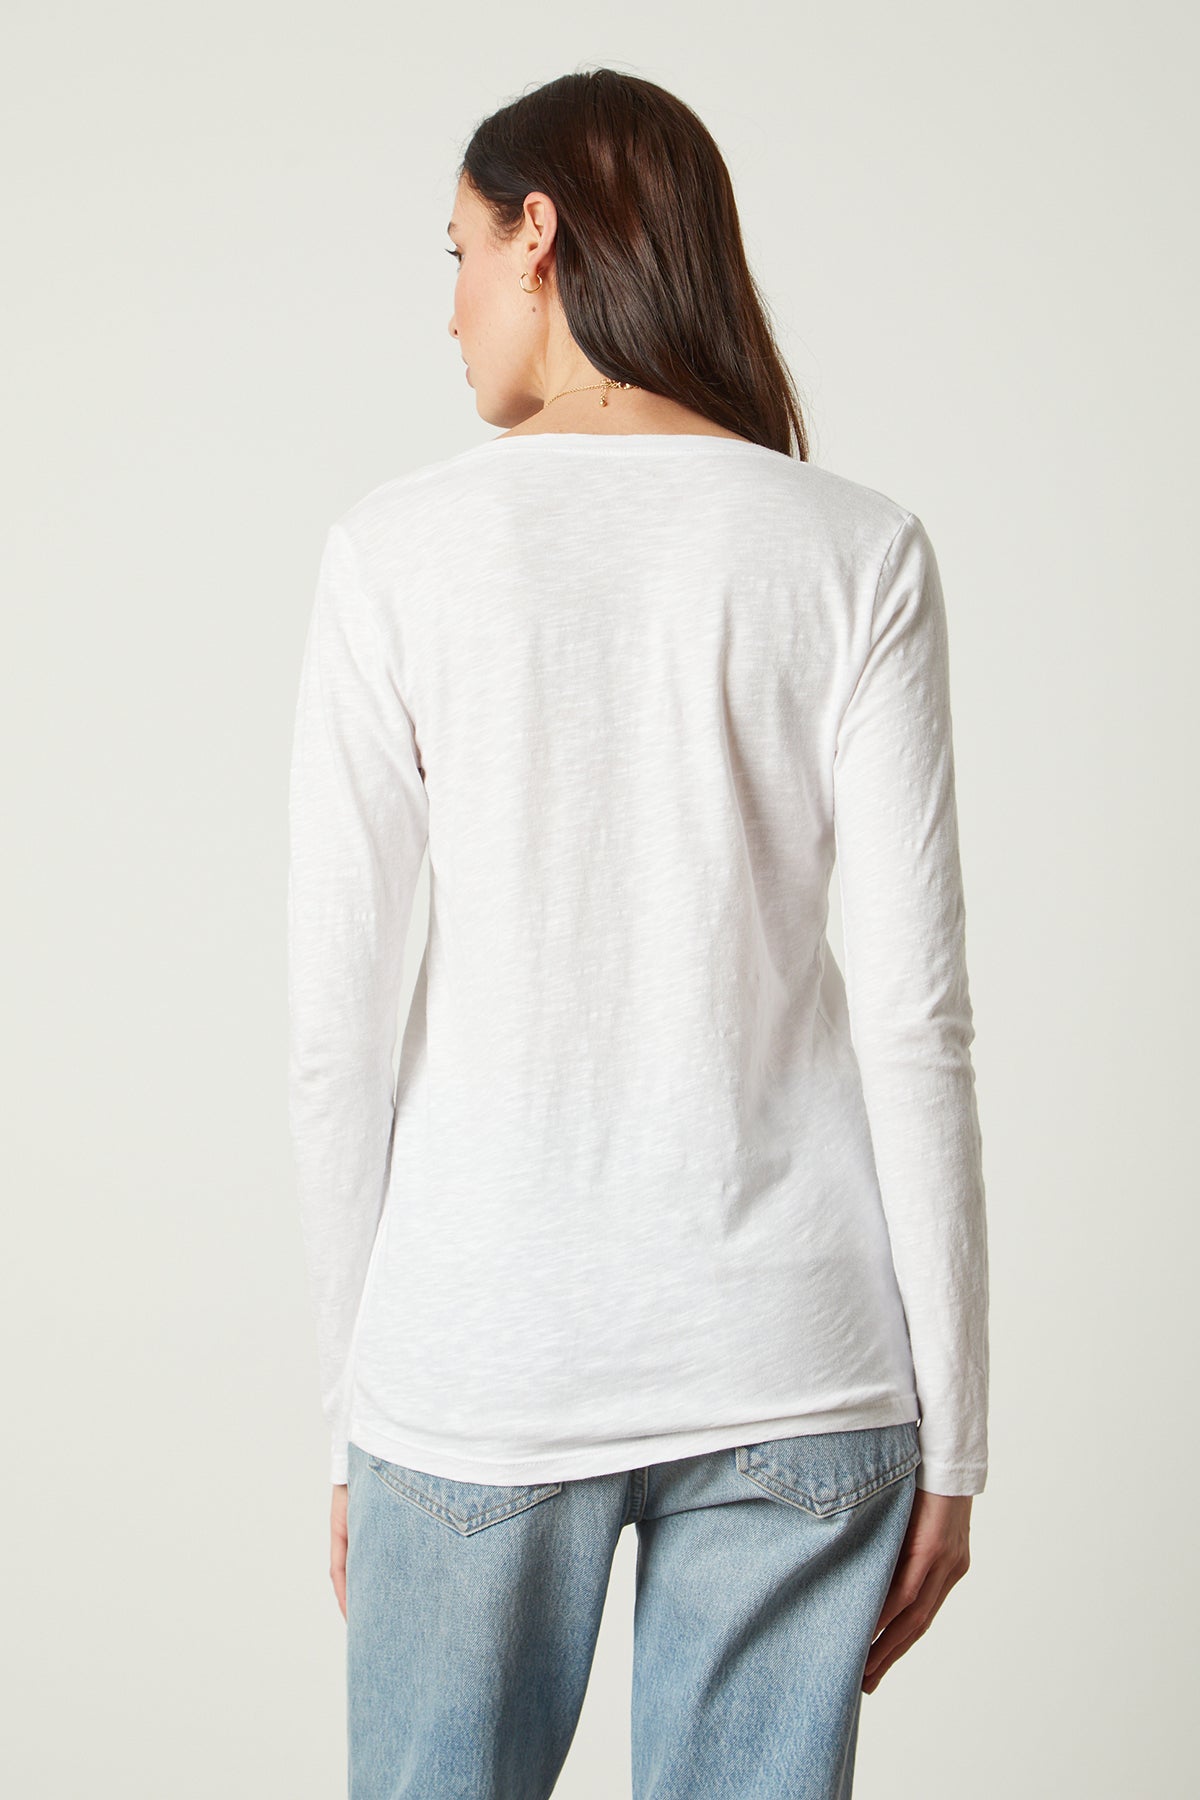 Blaire Original Slub Long Sleeve Tee with V Neck in white with light blue denim back view-25261593231553